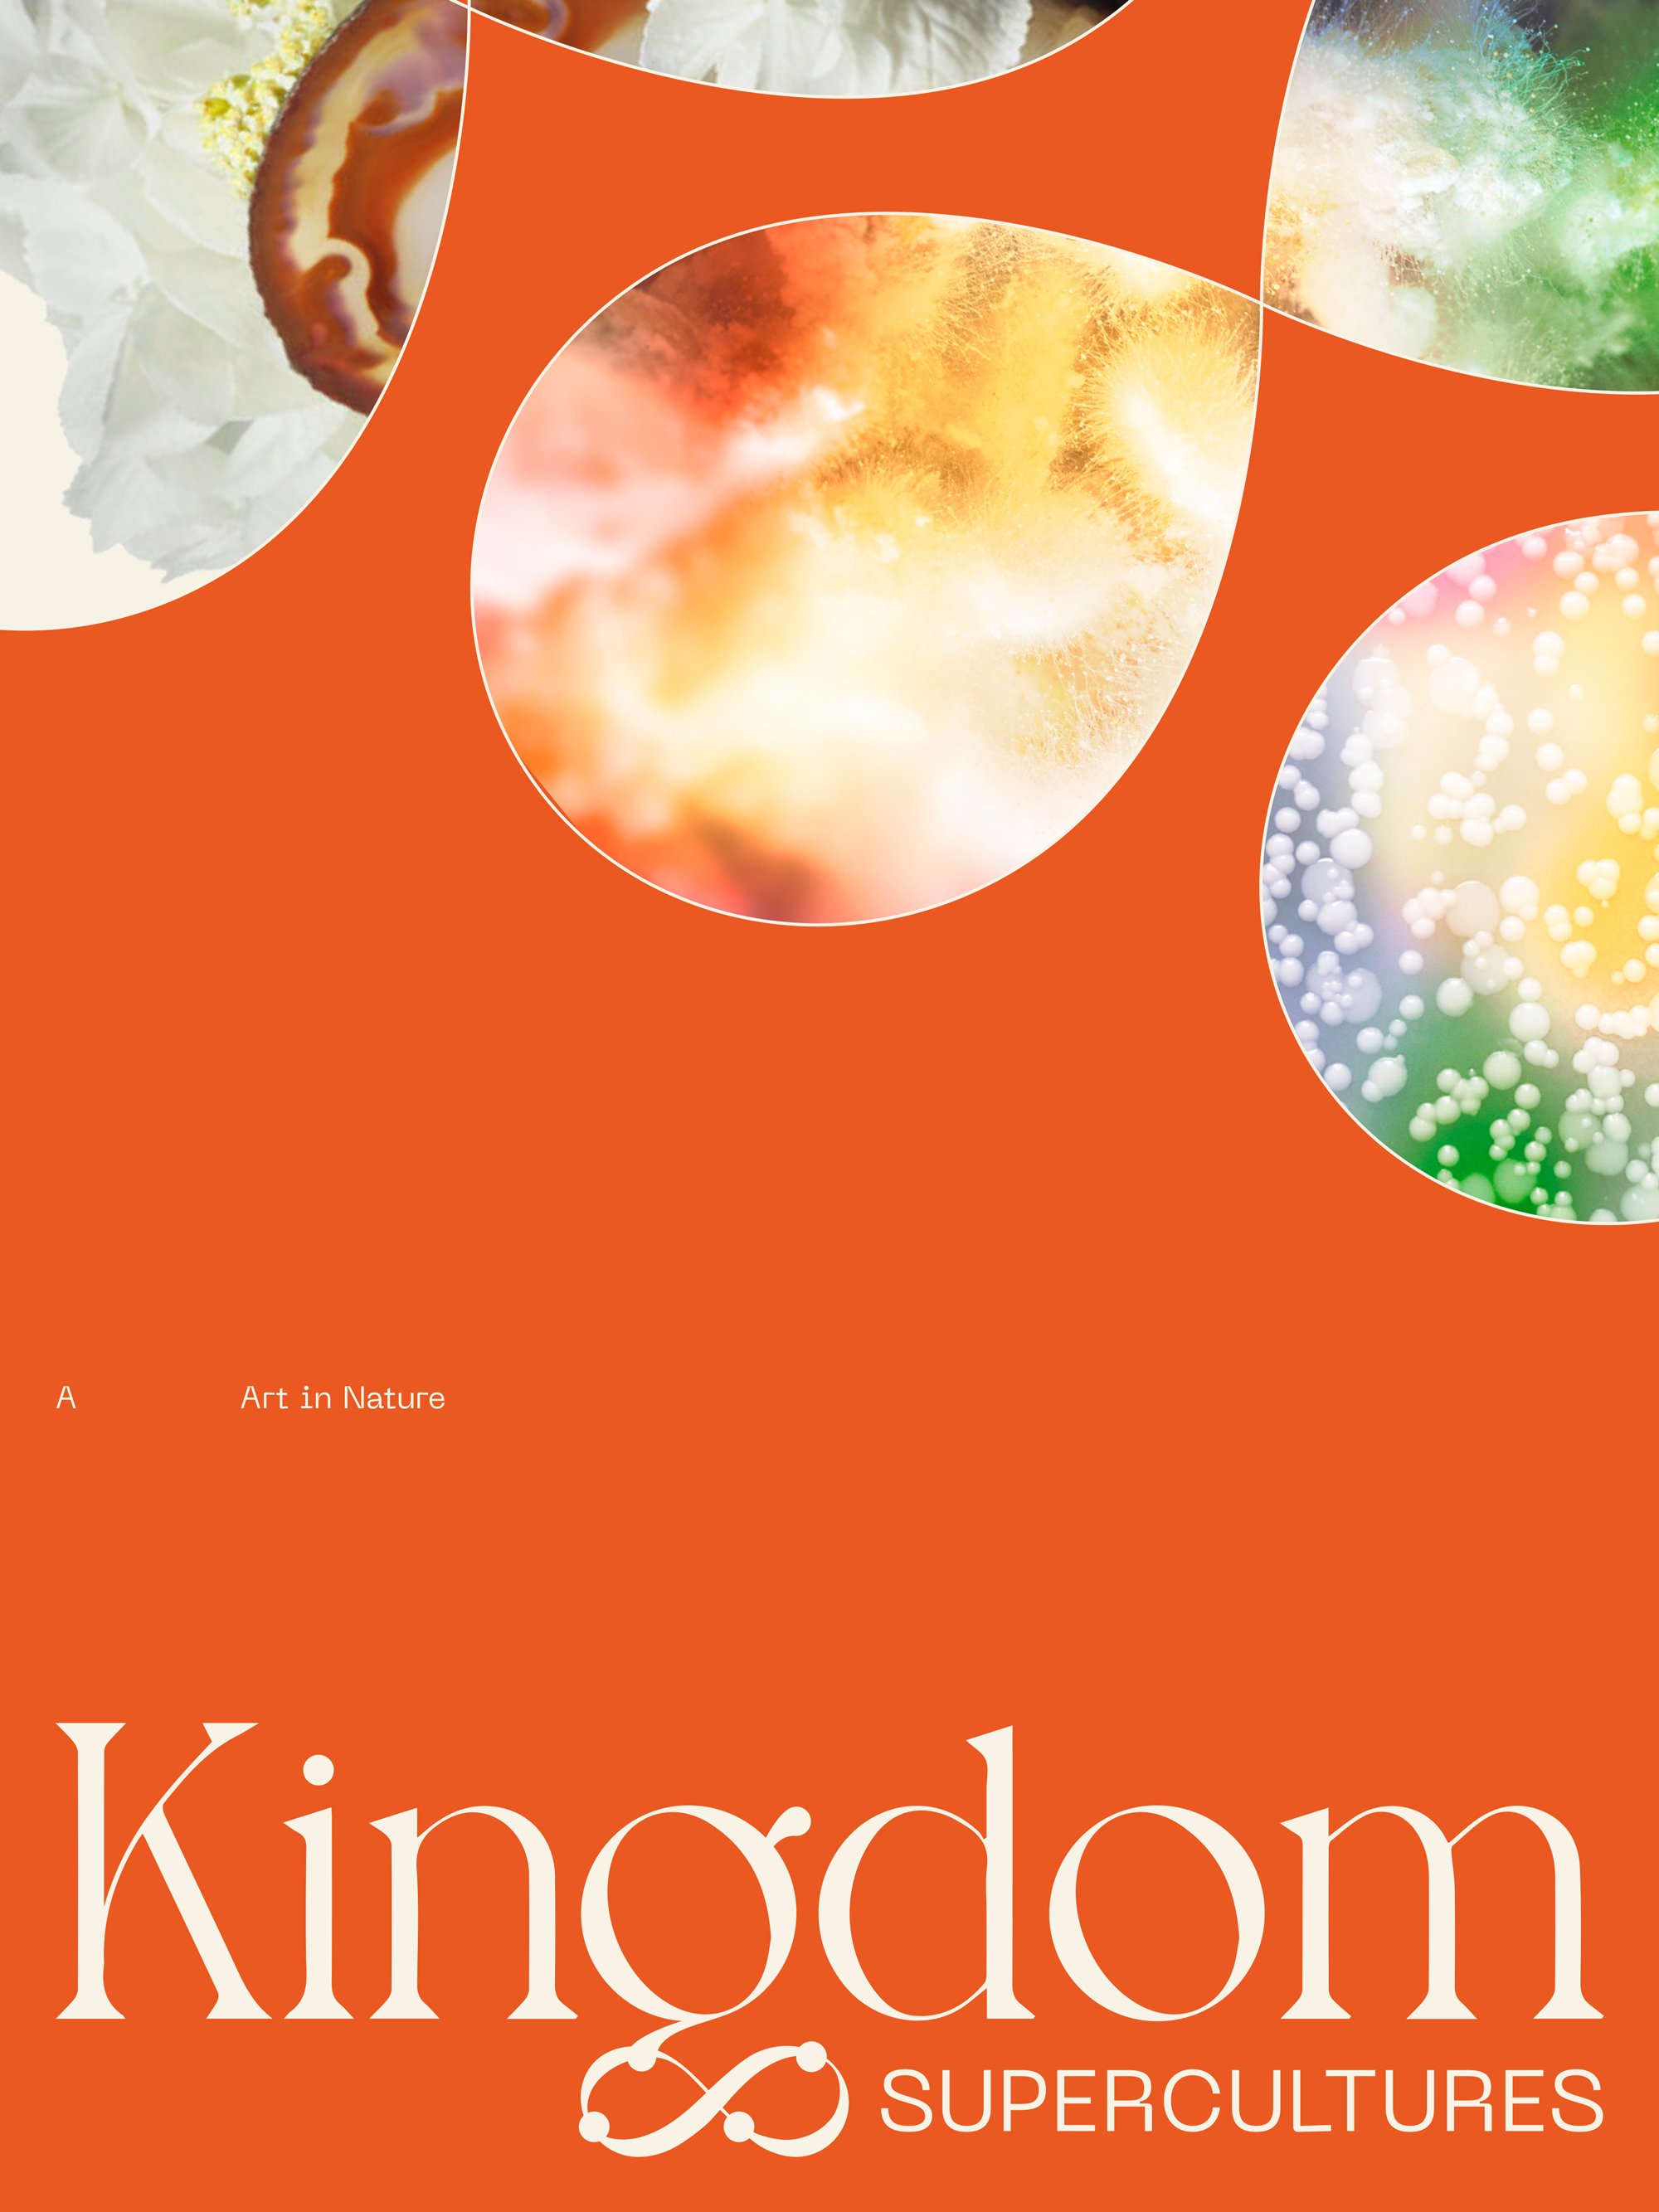 Kingdom Supercultures orange poster with custom infinity sign graphics, designed by RoAndCo